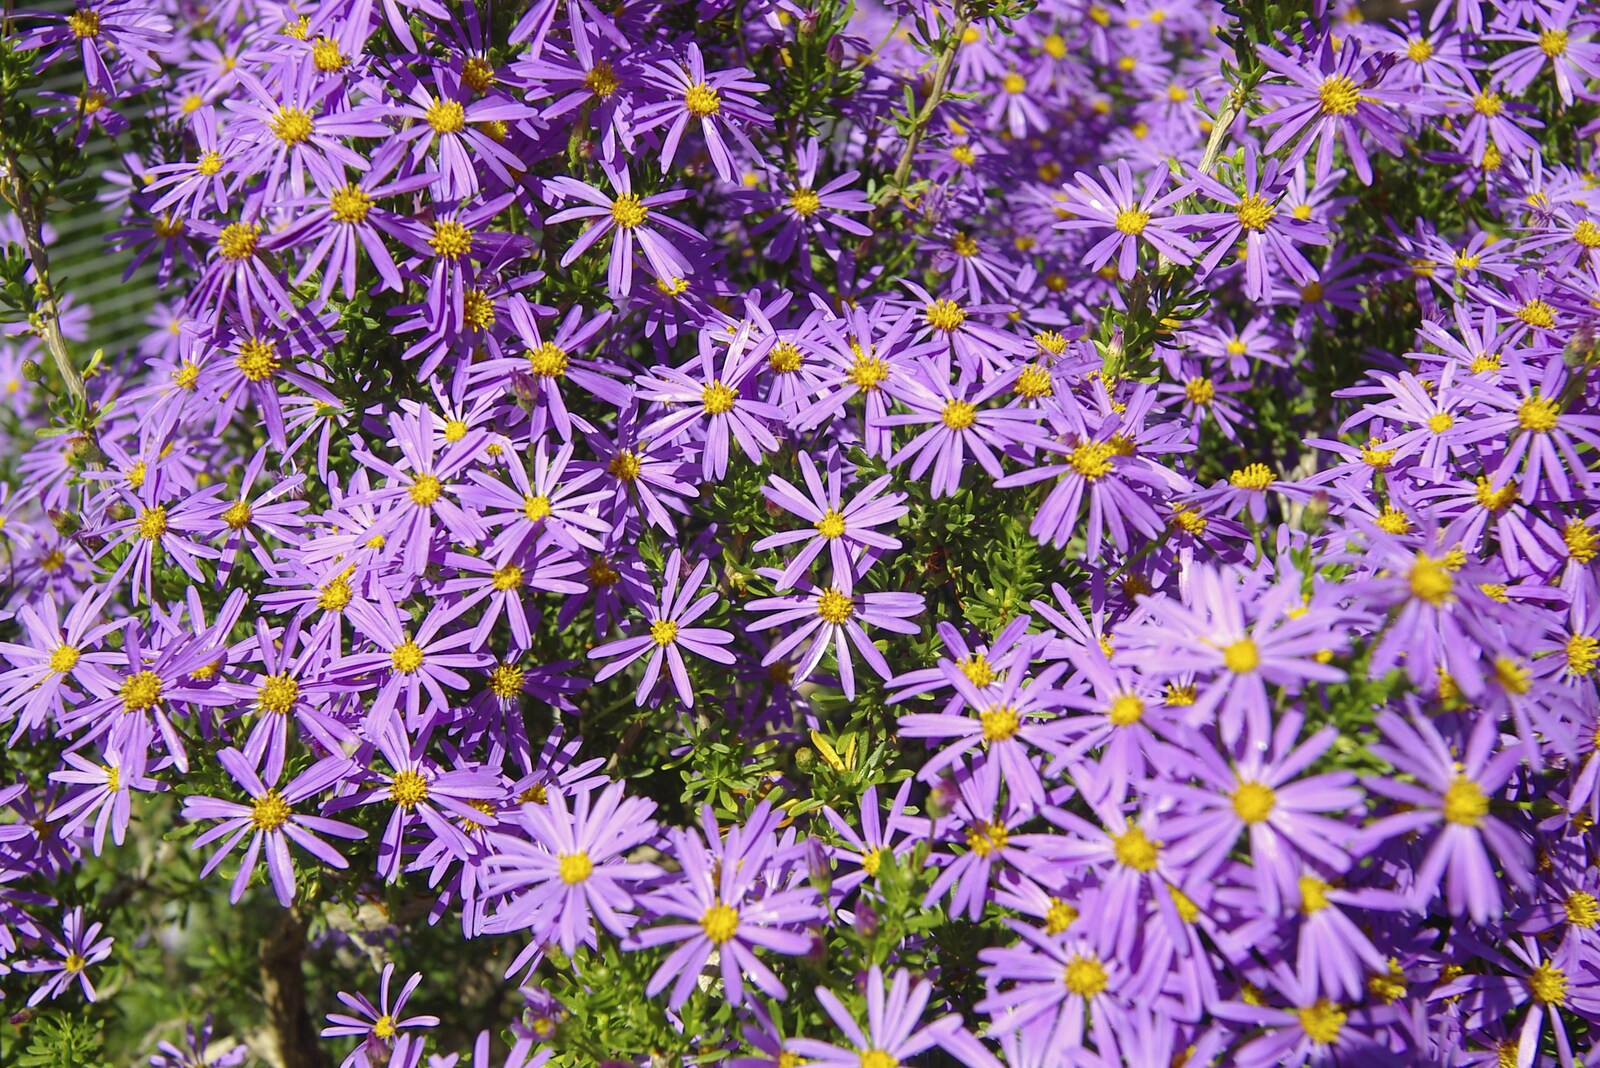 Bright purple flowers from San Diego Seven: The Desert and the Dunes, Arizona and California, US - 22nd April